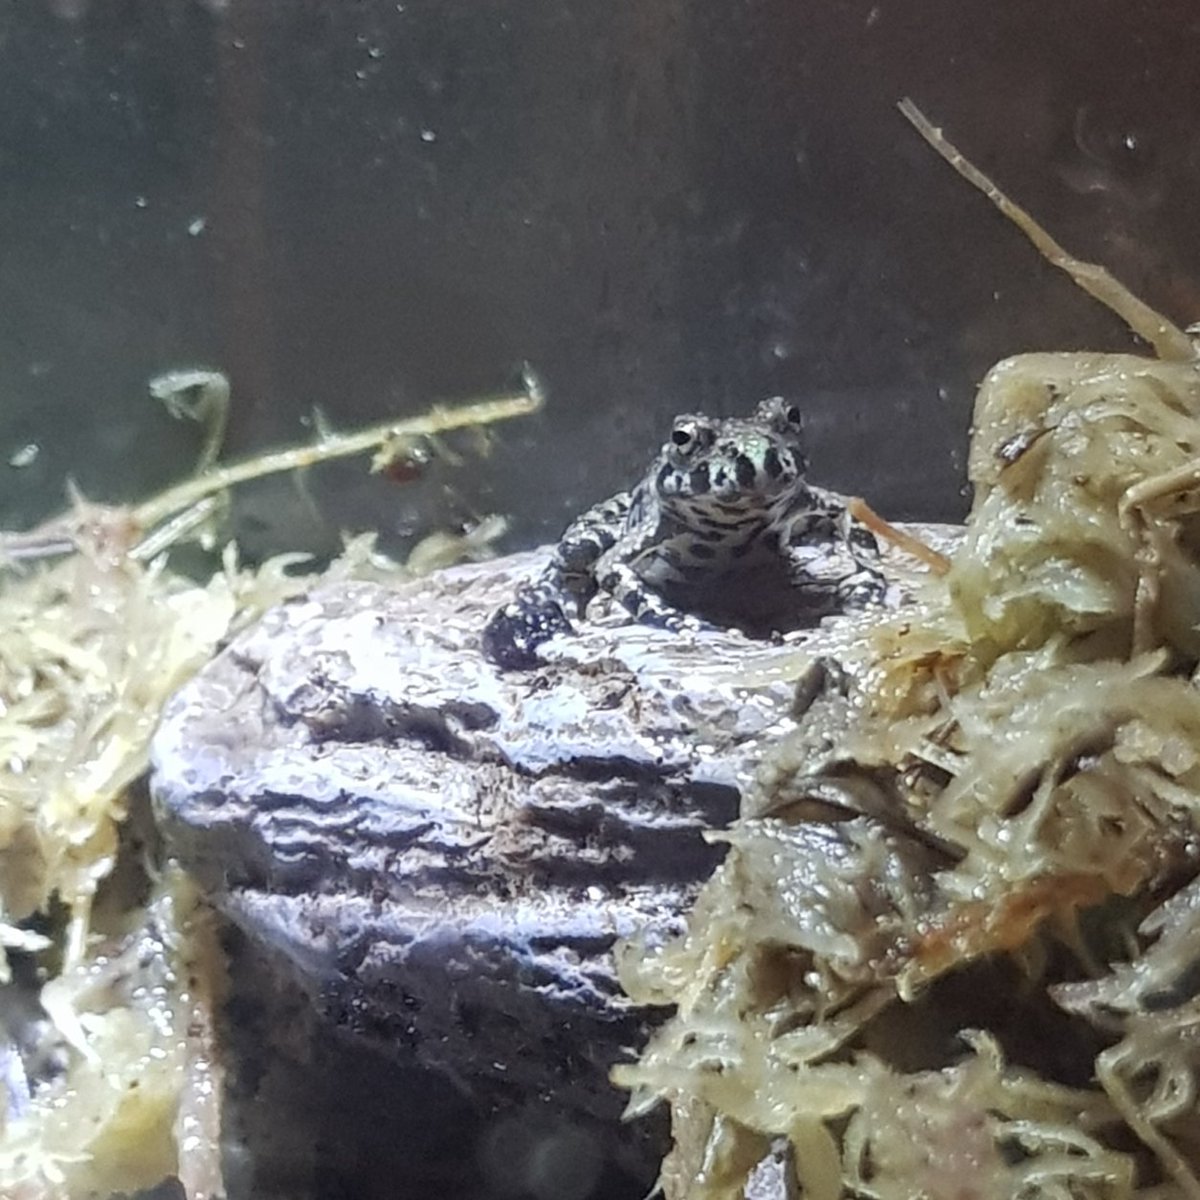 Started keeping frogs a few months back too, there's so much shit I need to share from the social media hiatus.

This is one of my tiny chonks, name is Thor. Was once the size of my pinky-fingernail, now the size of my thumb. A sweet boi. https://t.co/lqM9Wz8Ehk